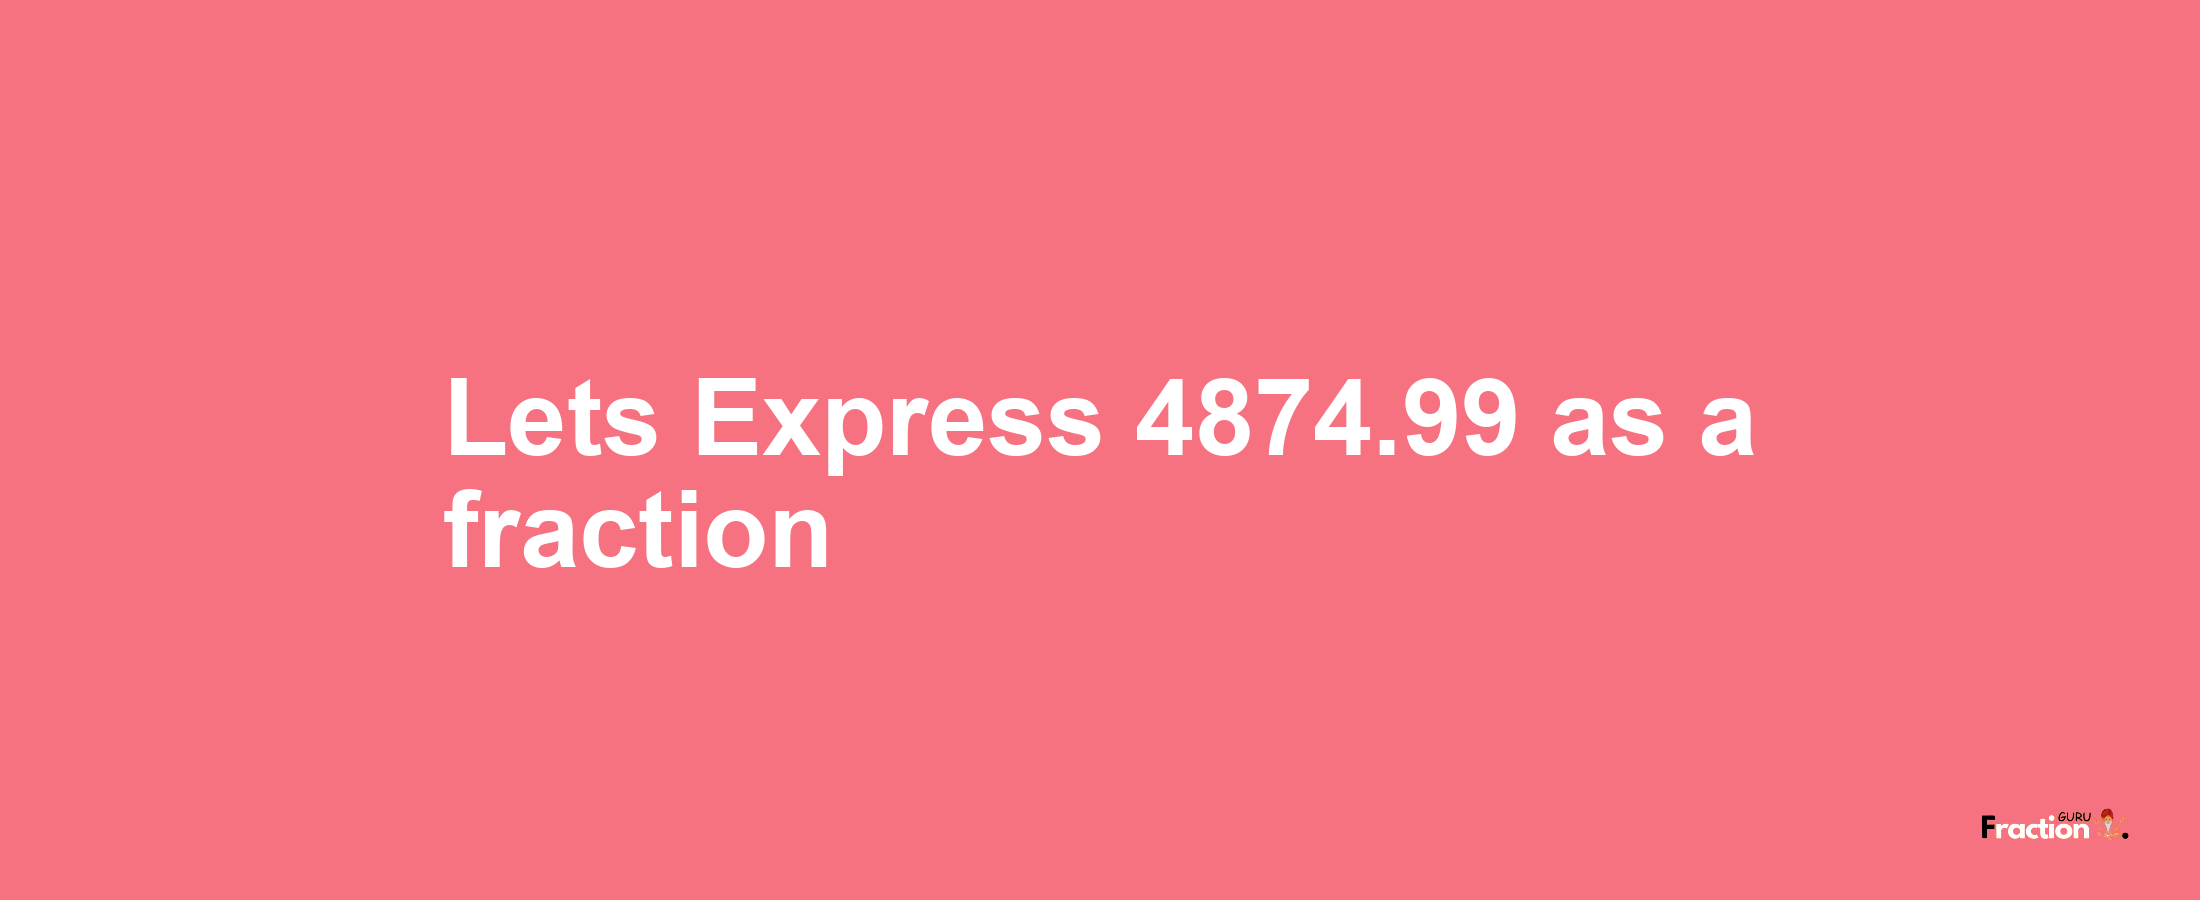 Lets Express 4874.99 as afraction